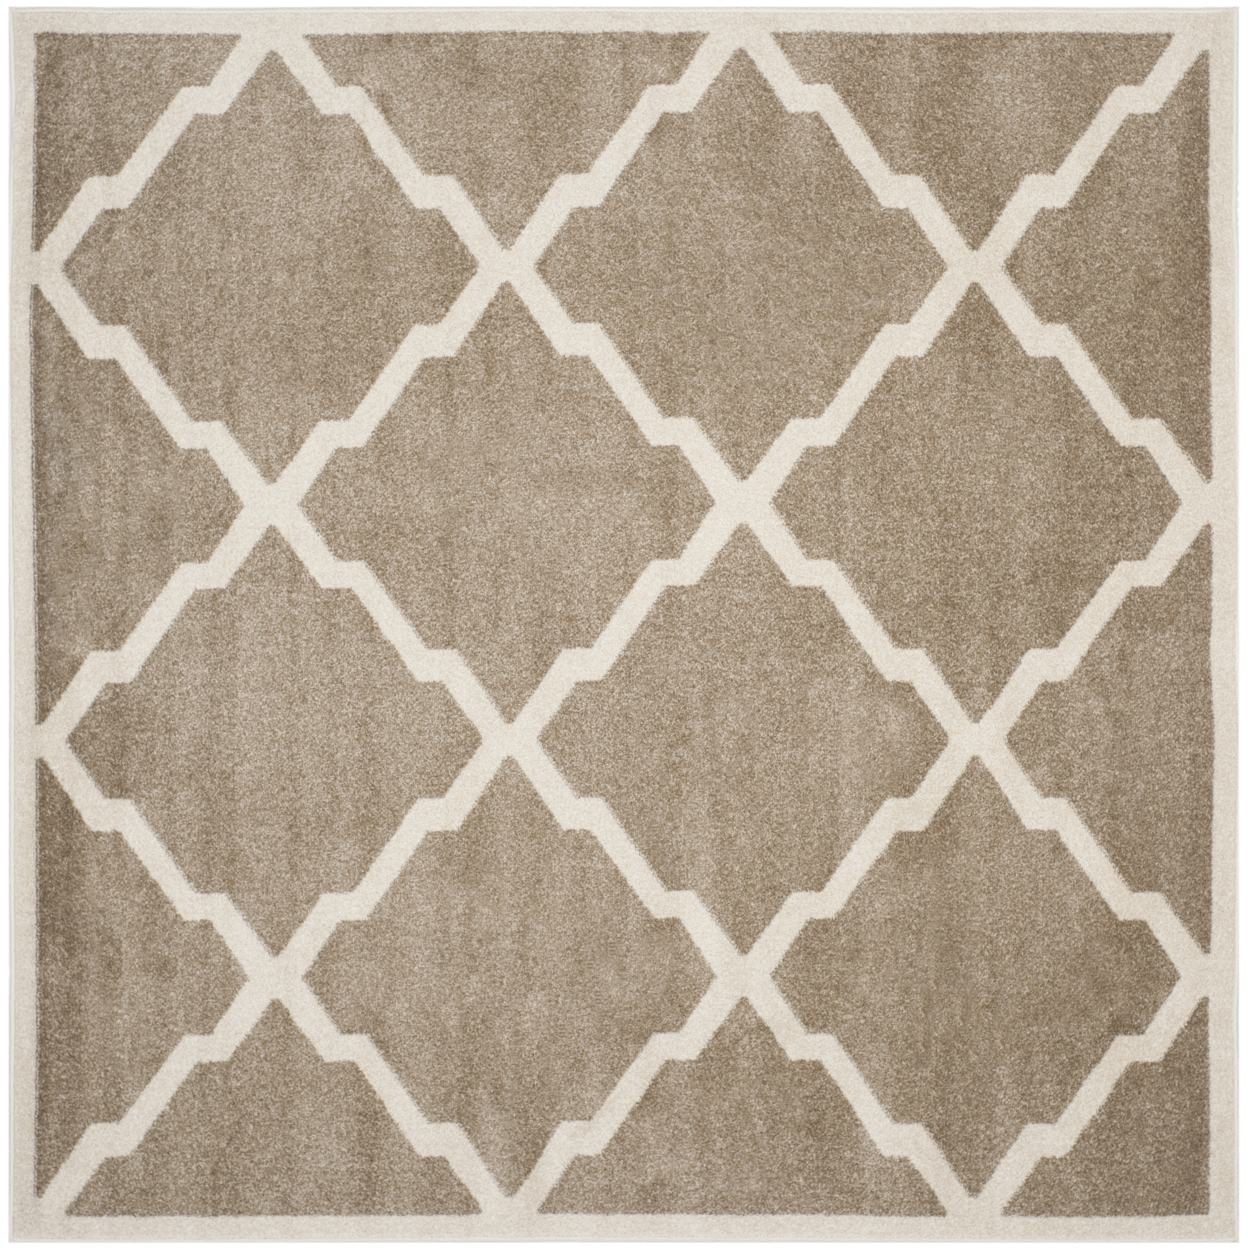 SAFAVIEH Amherst Collection AMT421S Wheat / Beige Rug - 9' Square